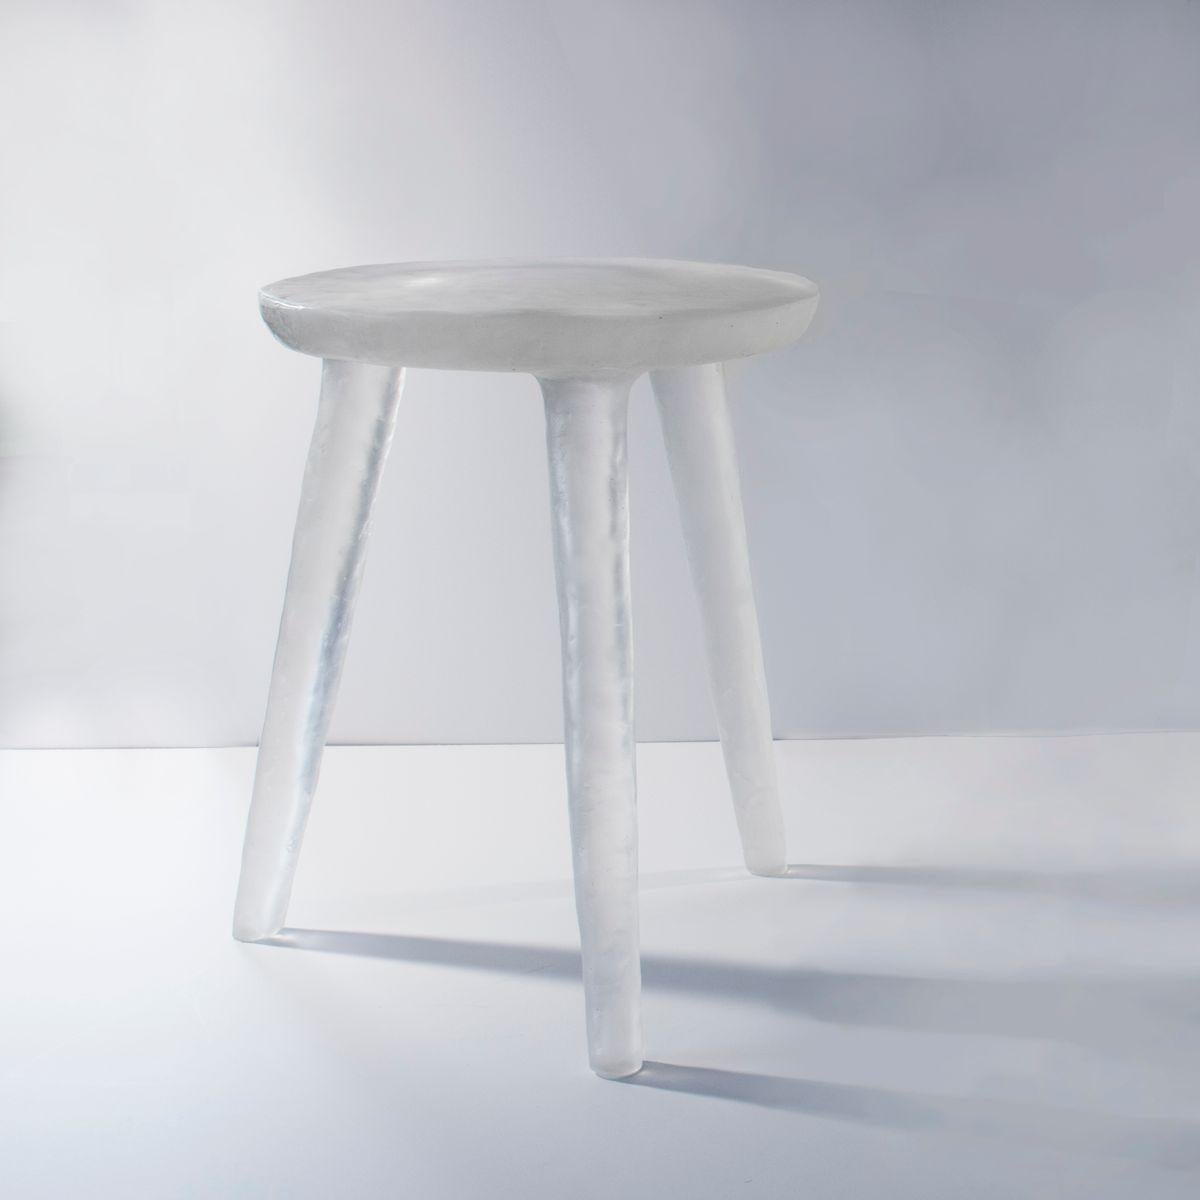 American Glow Side Table / Stool 'Peach' in Recycled Plastic For Sale